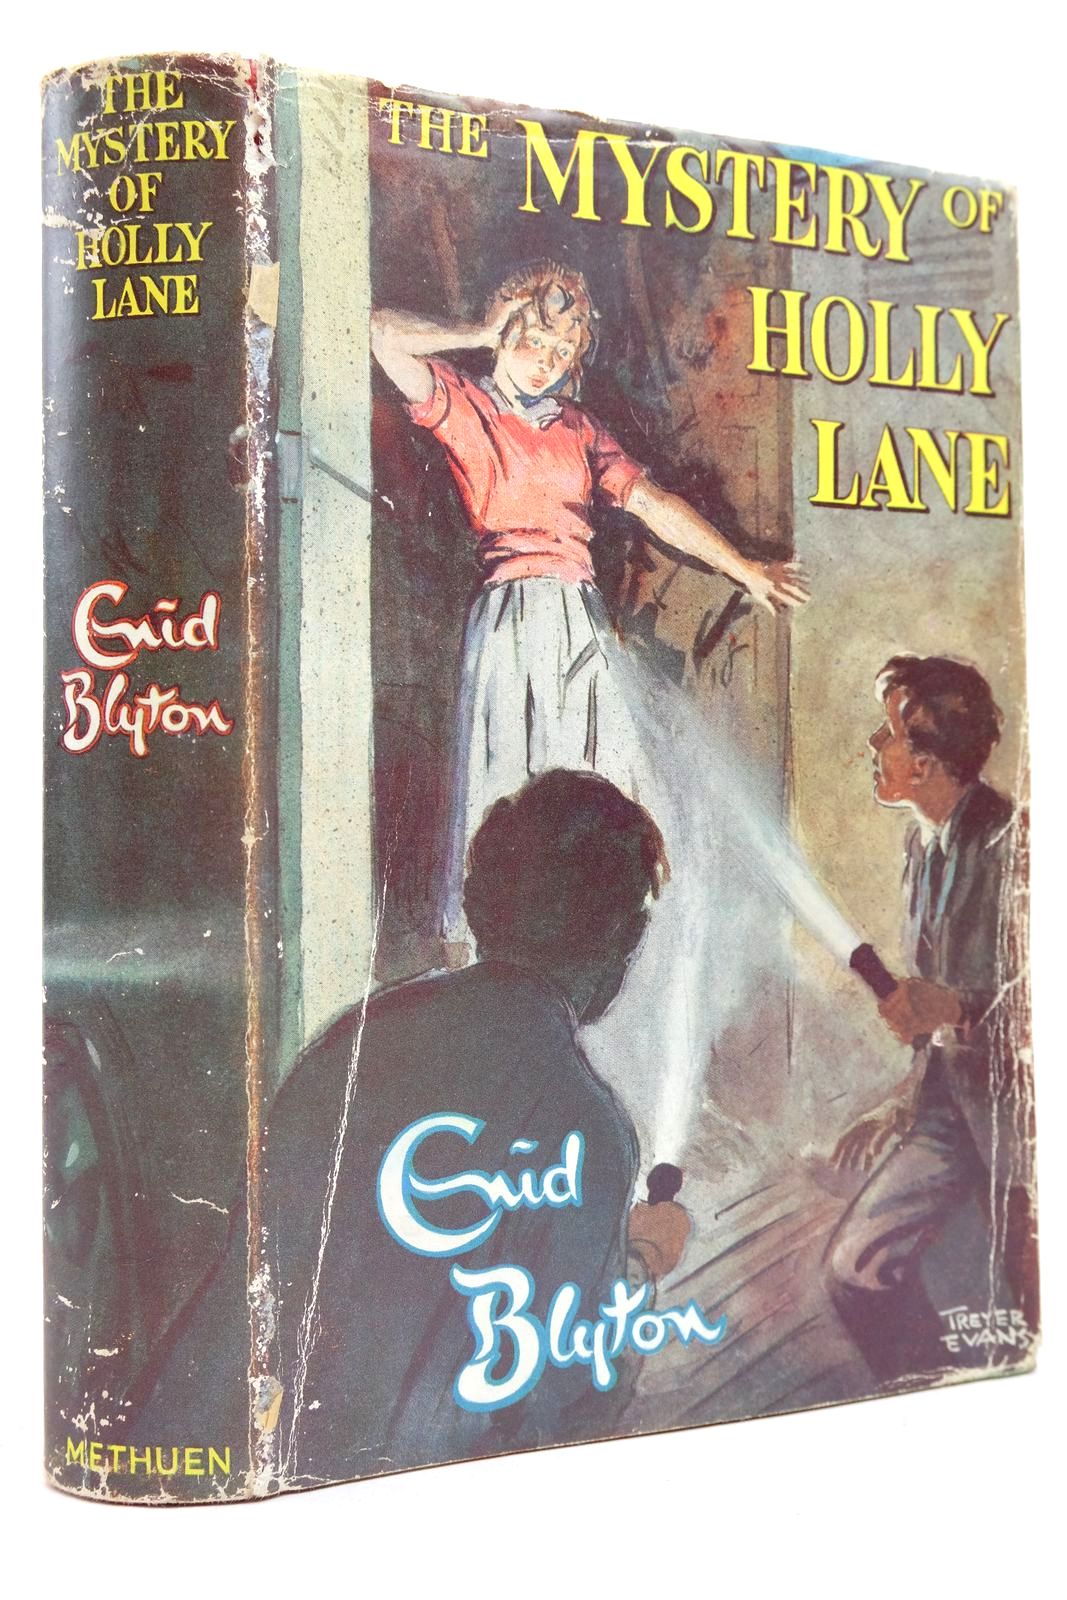 Photo of THE MYSTERY OF HOLLY LANE written by Blyton, Enid illustrated by Evans, Treyer published by Methuen &amp; Co. Ltd. (STOCK CODE: 2140465)  for sale by Stella & Rose's Books